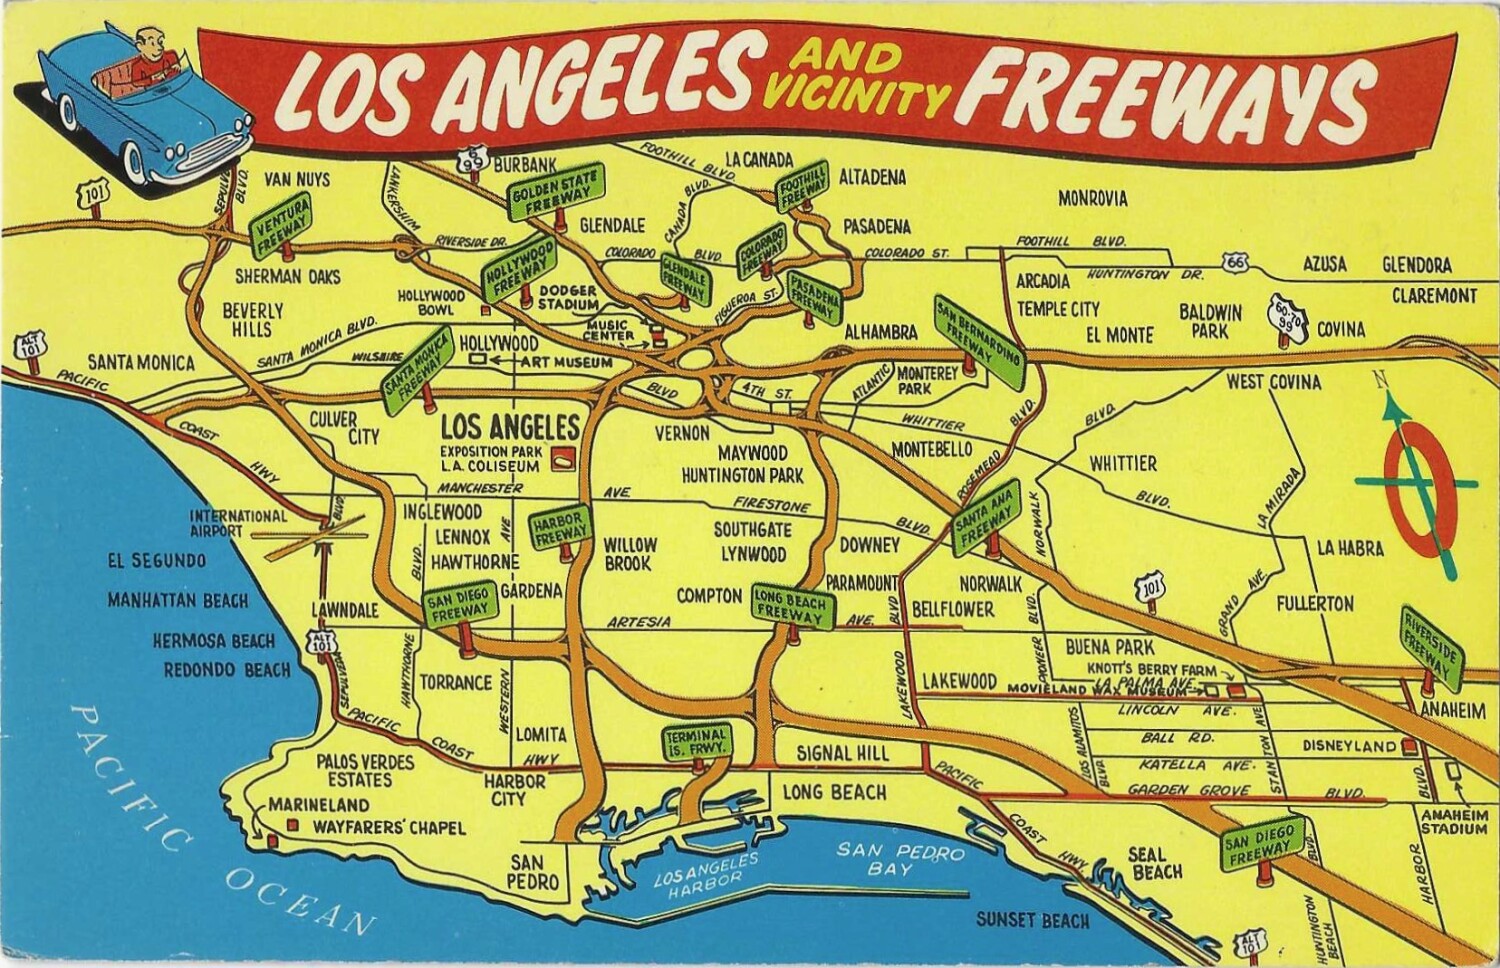 The ghosts of L.A.s unbuilt freeways — a wide median here, a stubby endpoint there